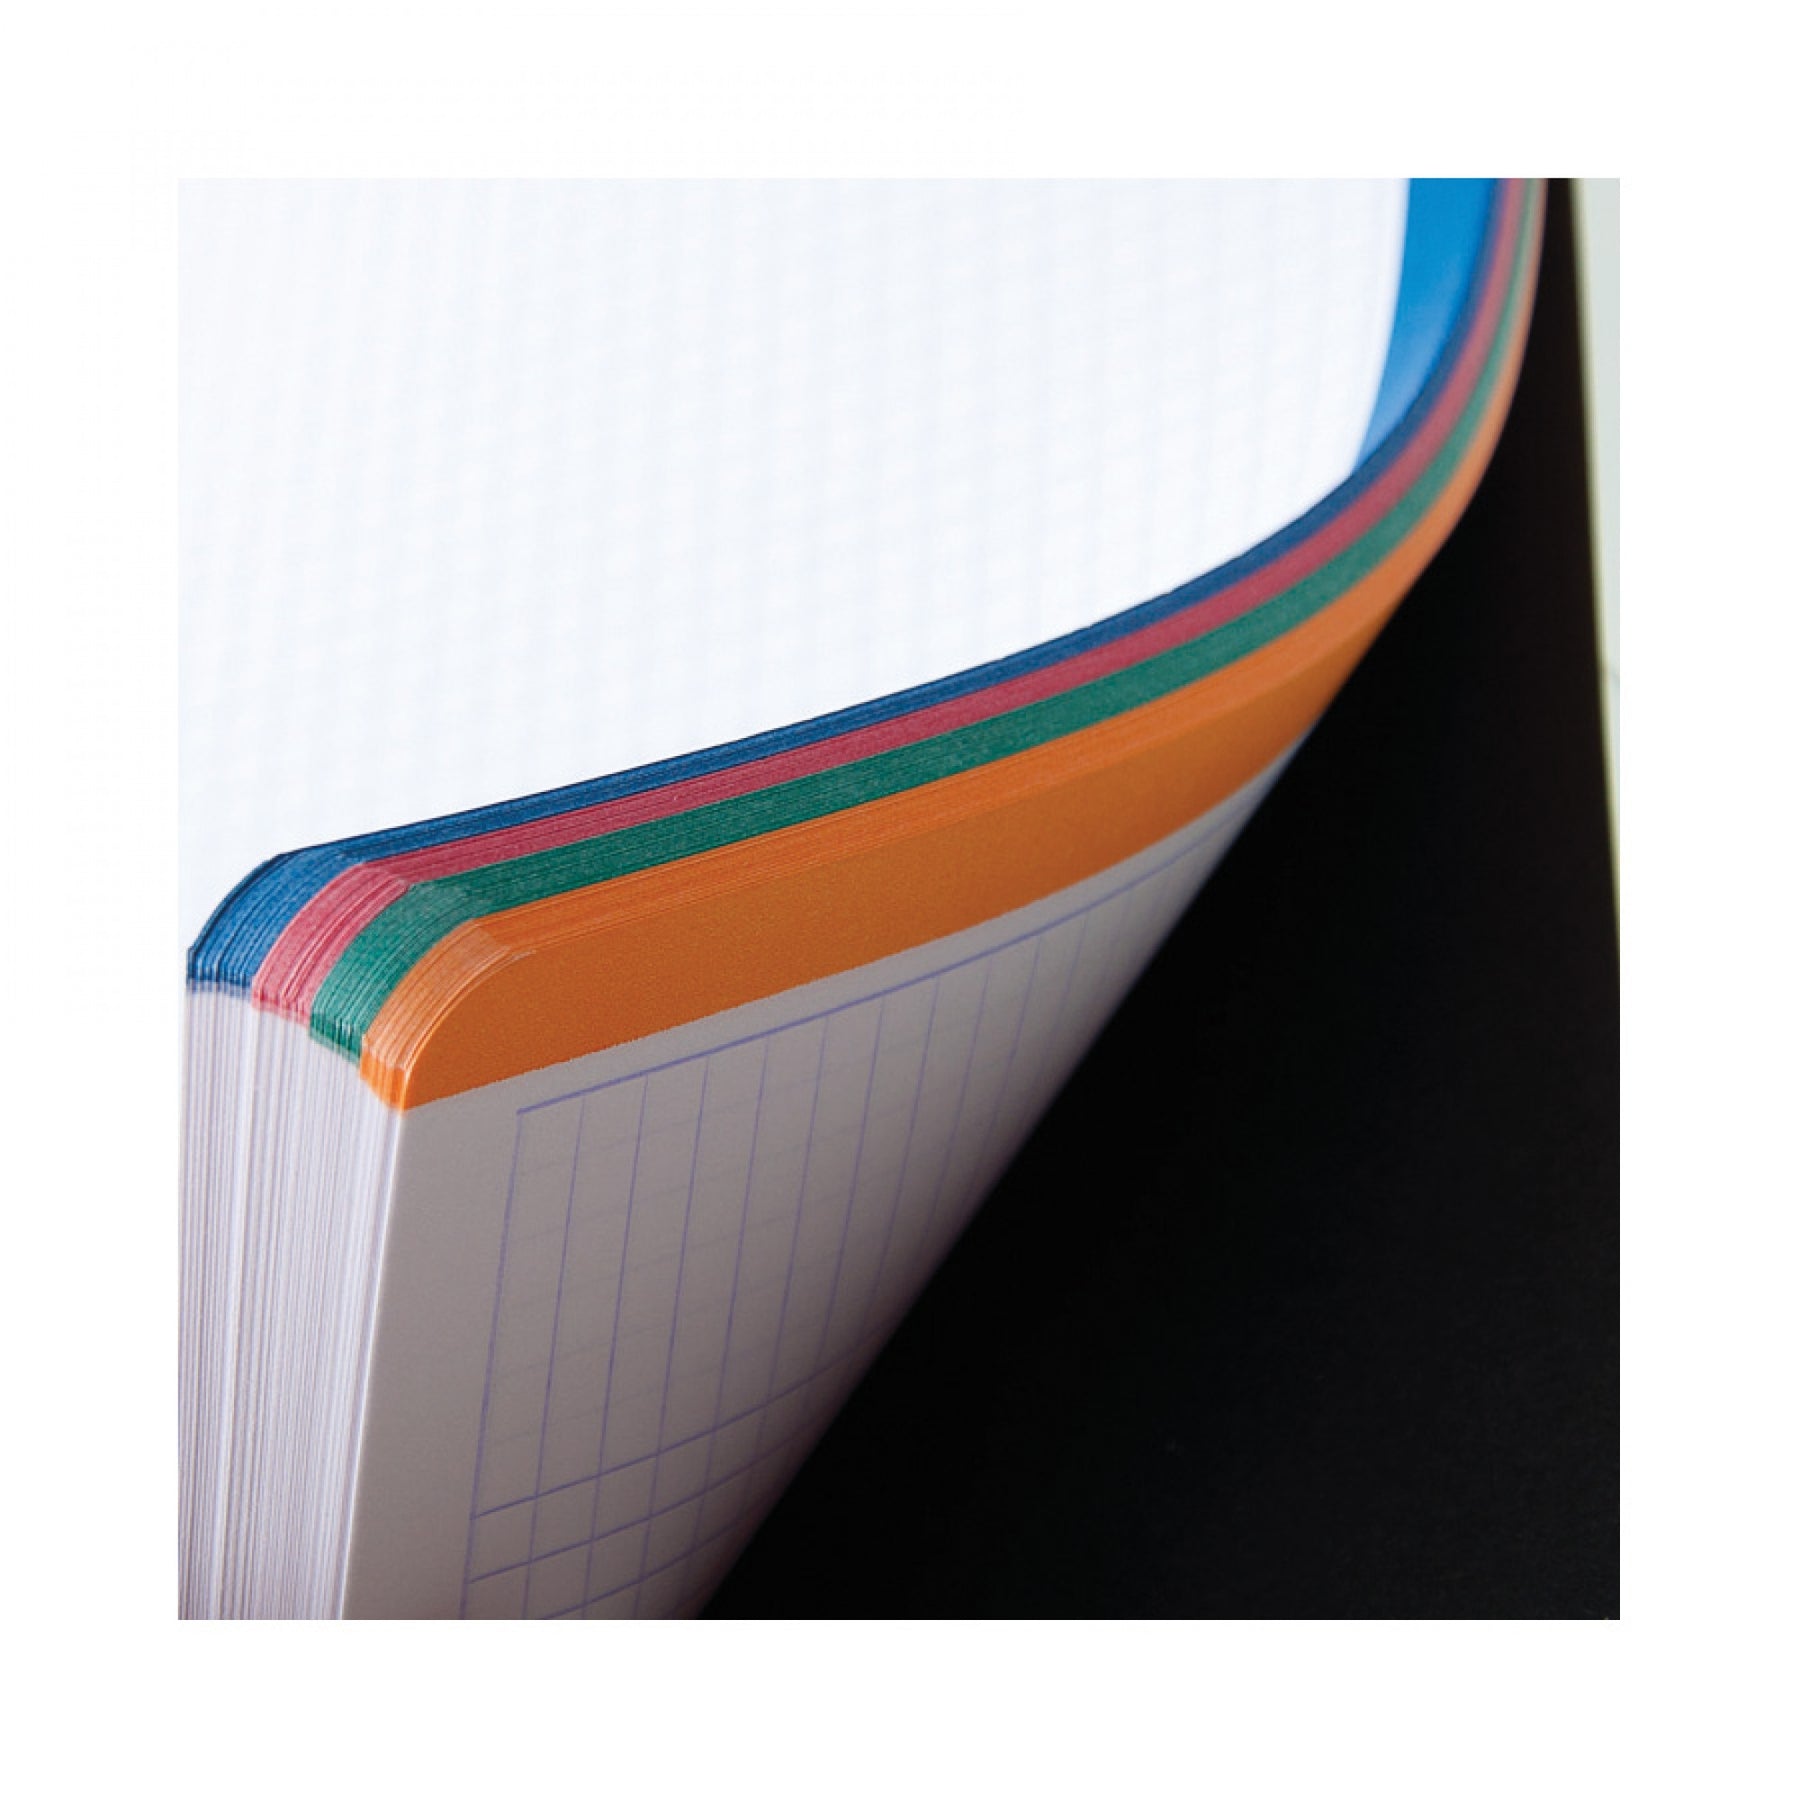 Rhodia Classic 4 Color Side Wirebound Notebook 9 x 11 ¾- Black, Lined